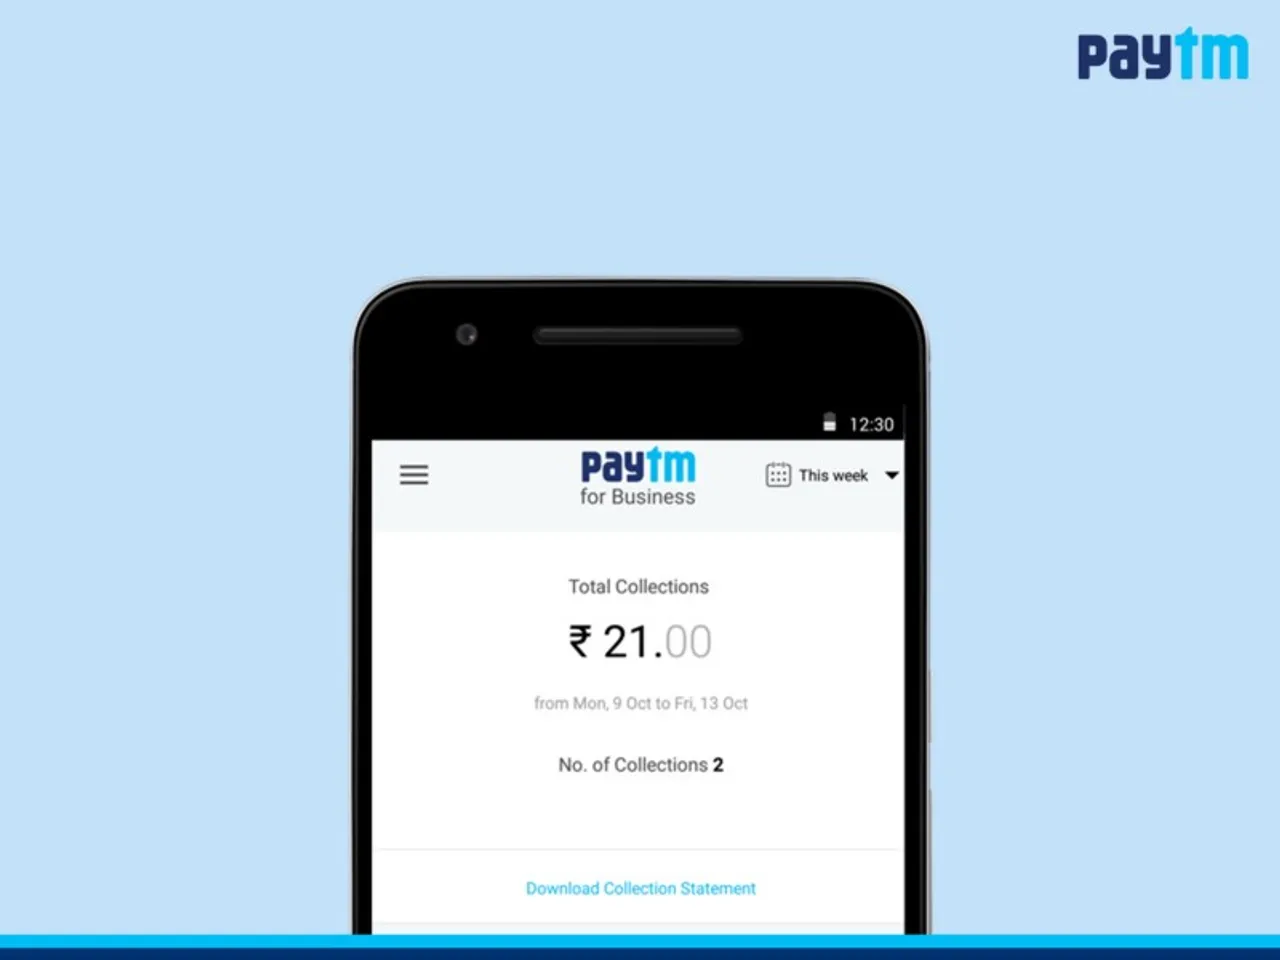 Paytm launches Business app for Android aimed at small merchants